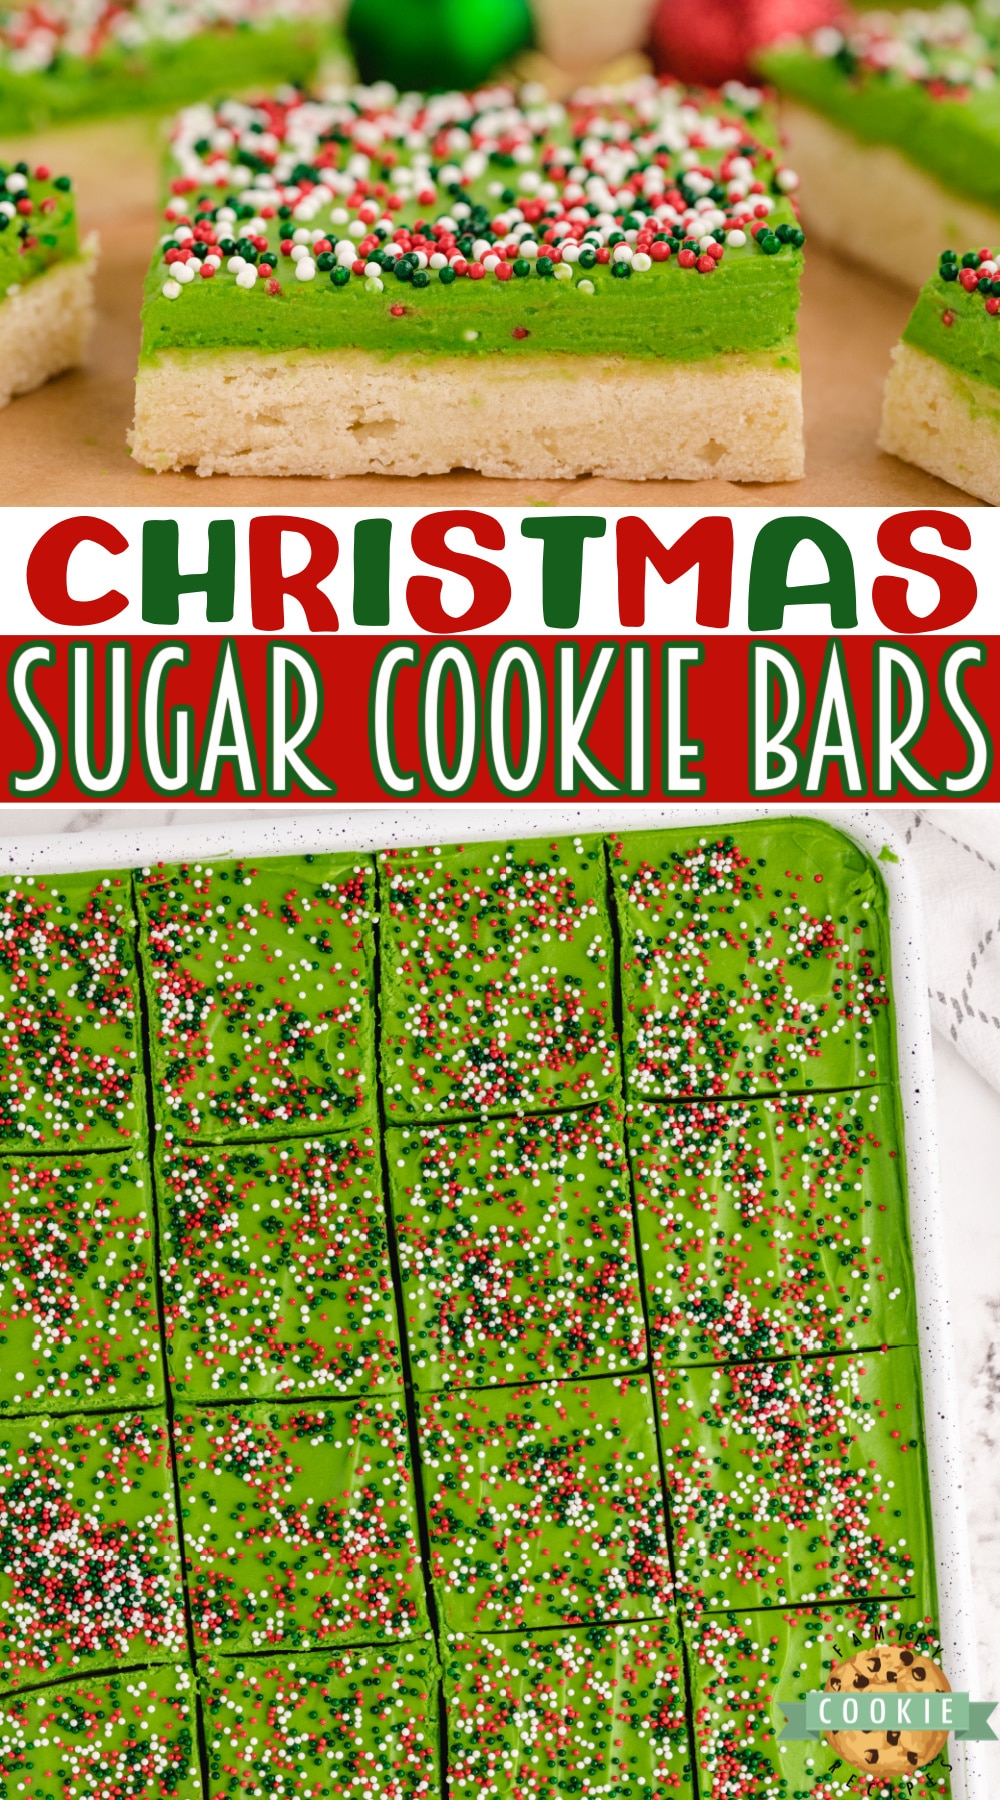 Christmas Sugar Cookie Bars are thick, soft and absolutely amazing! Best sugar cookie bar recipe that I've ever tried! via @buttergirls